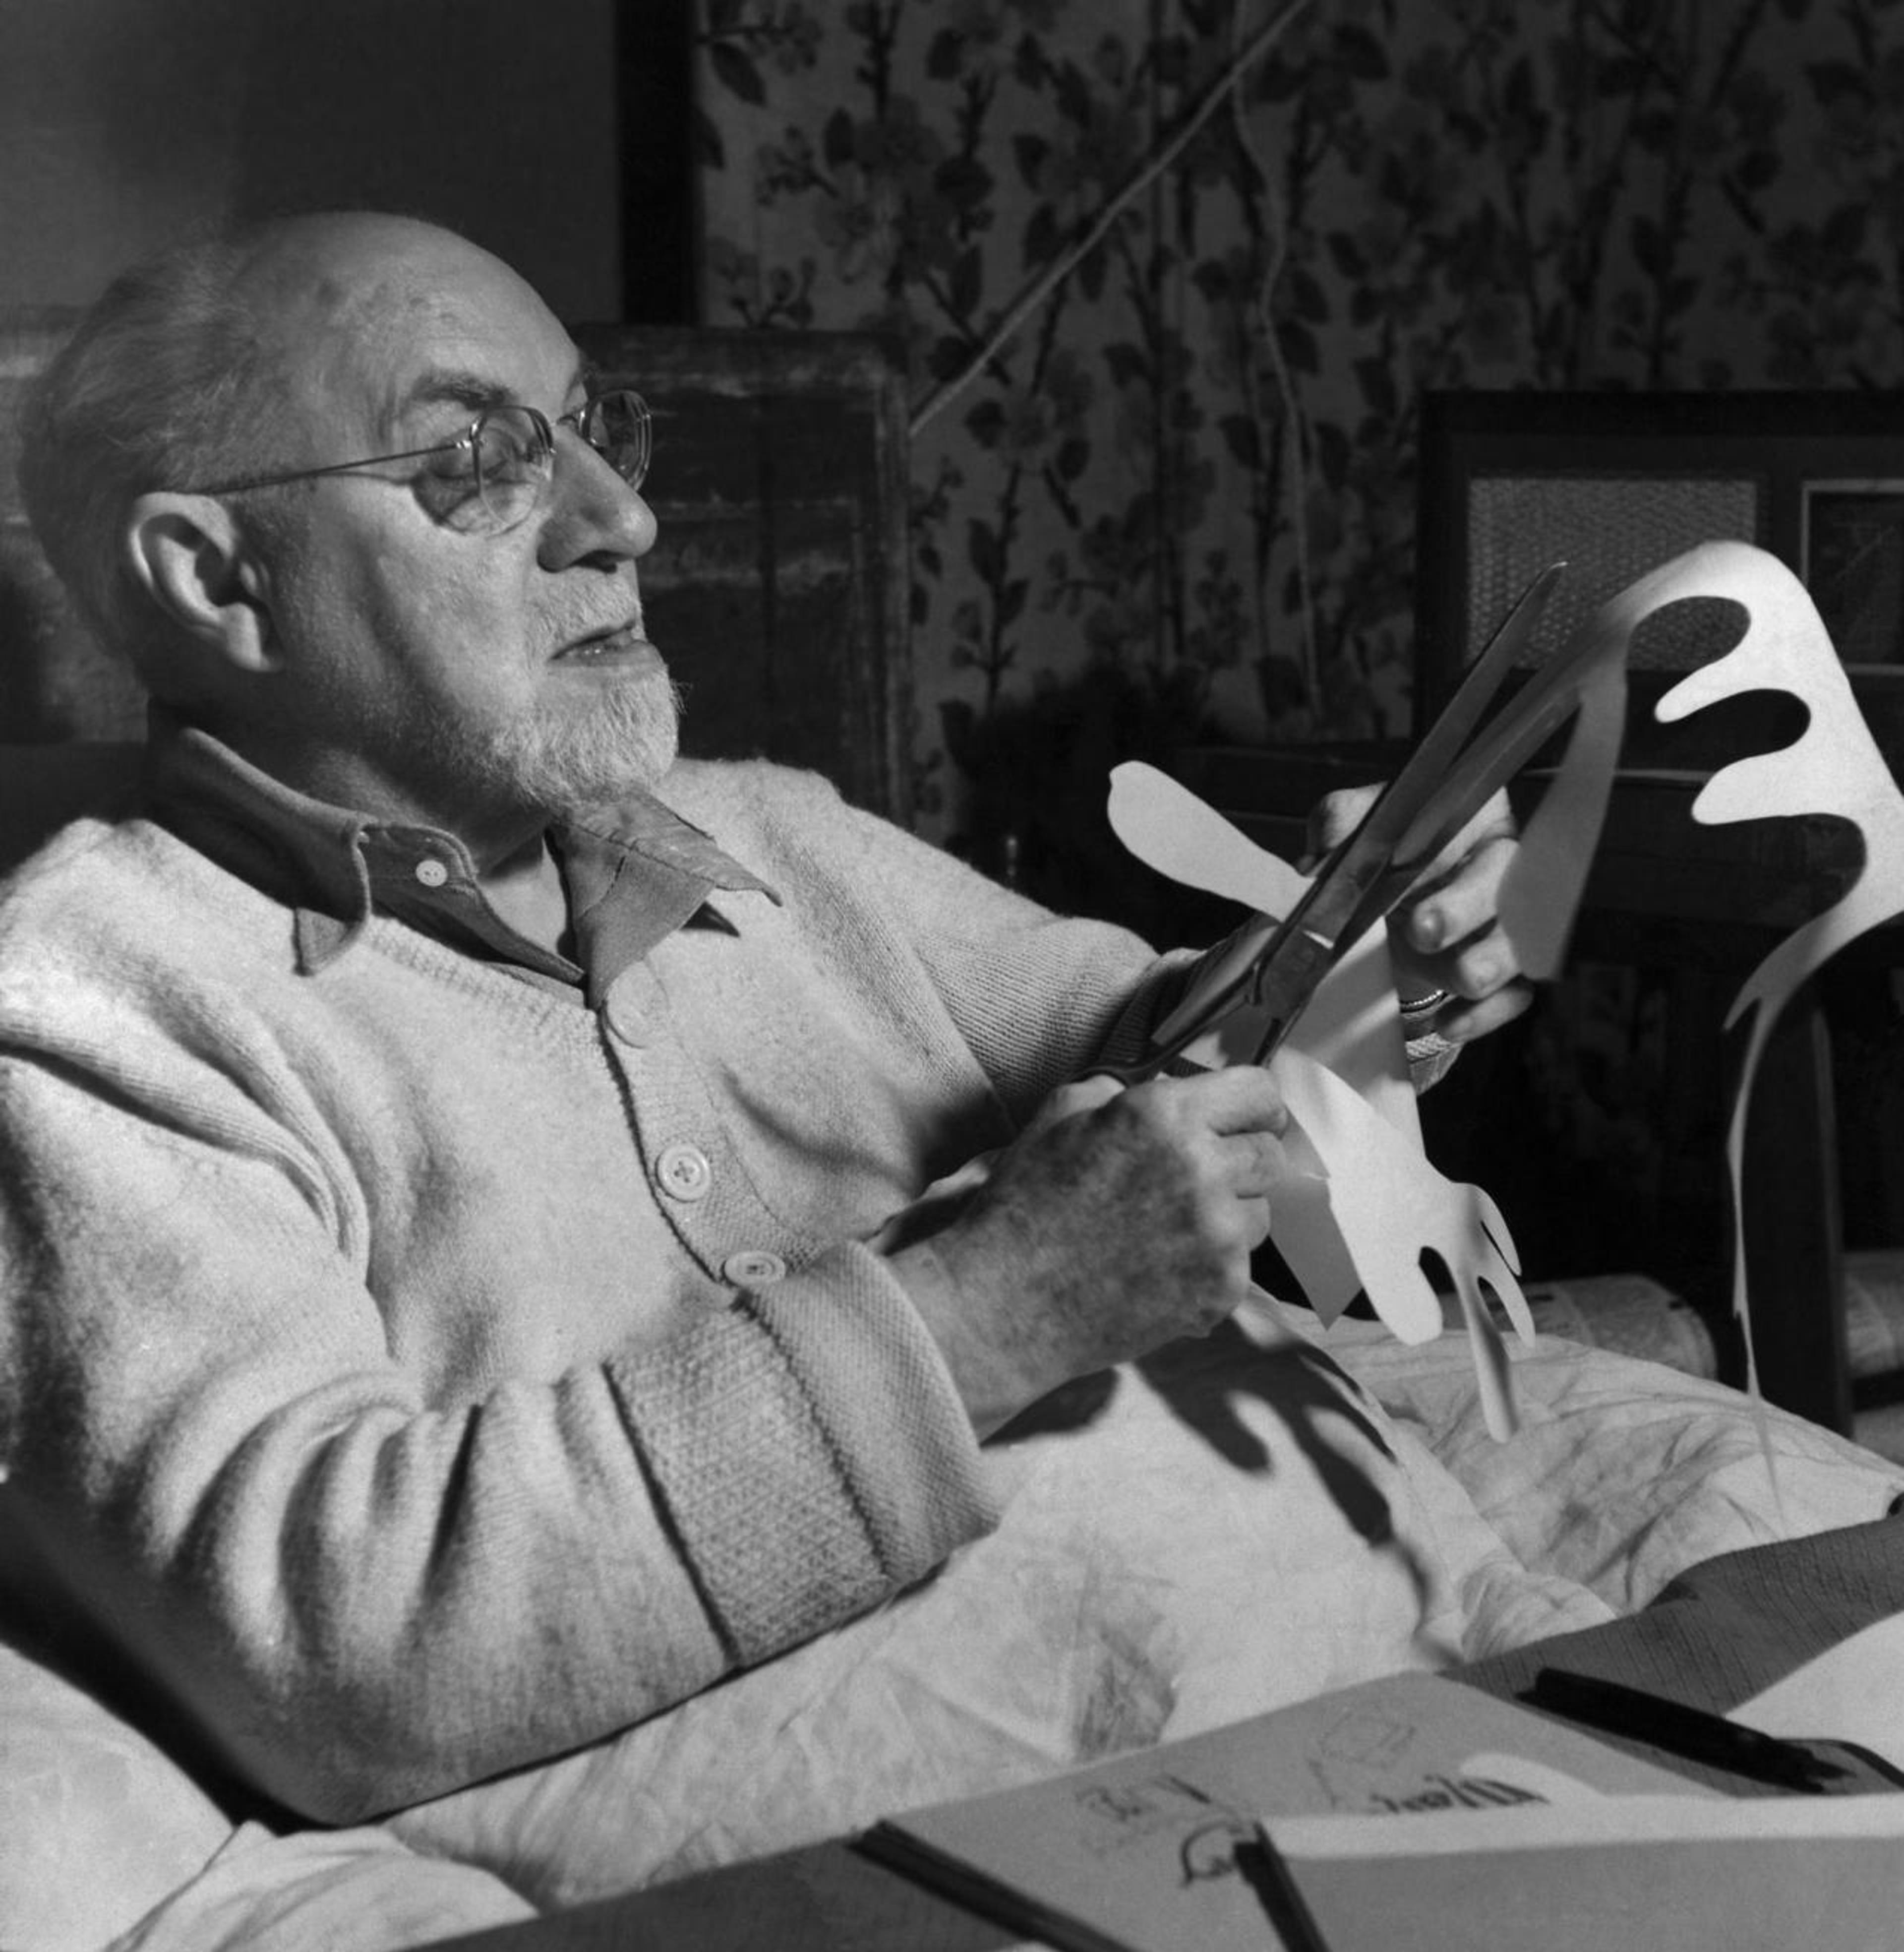 Henri Matisse working on paper cut out, n.d.